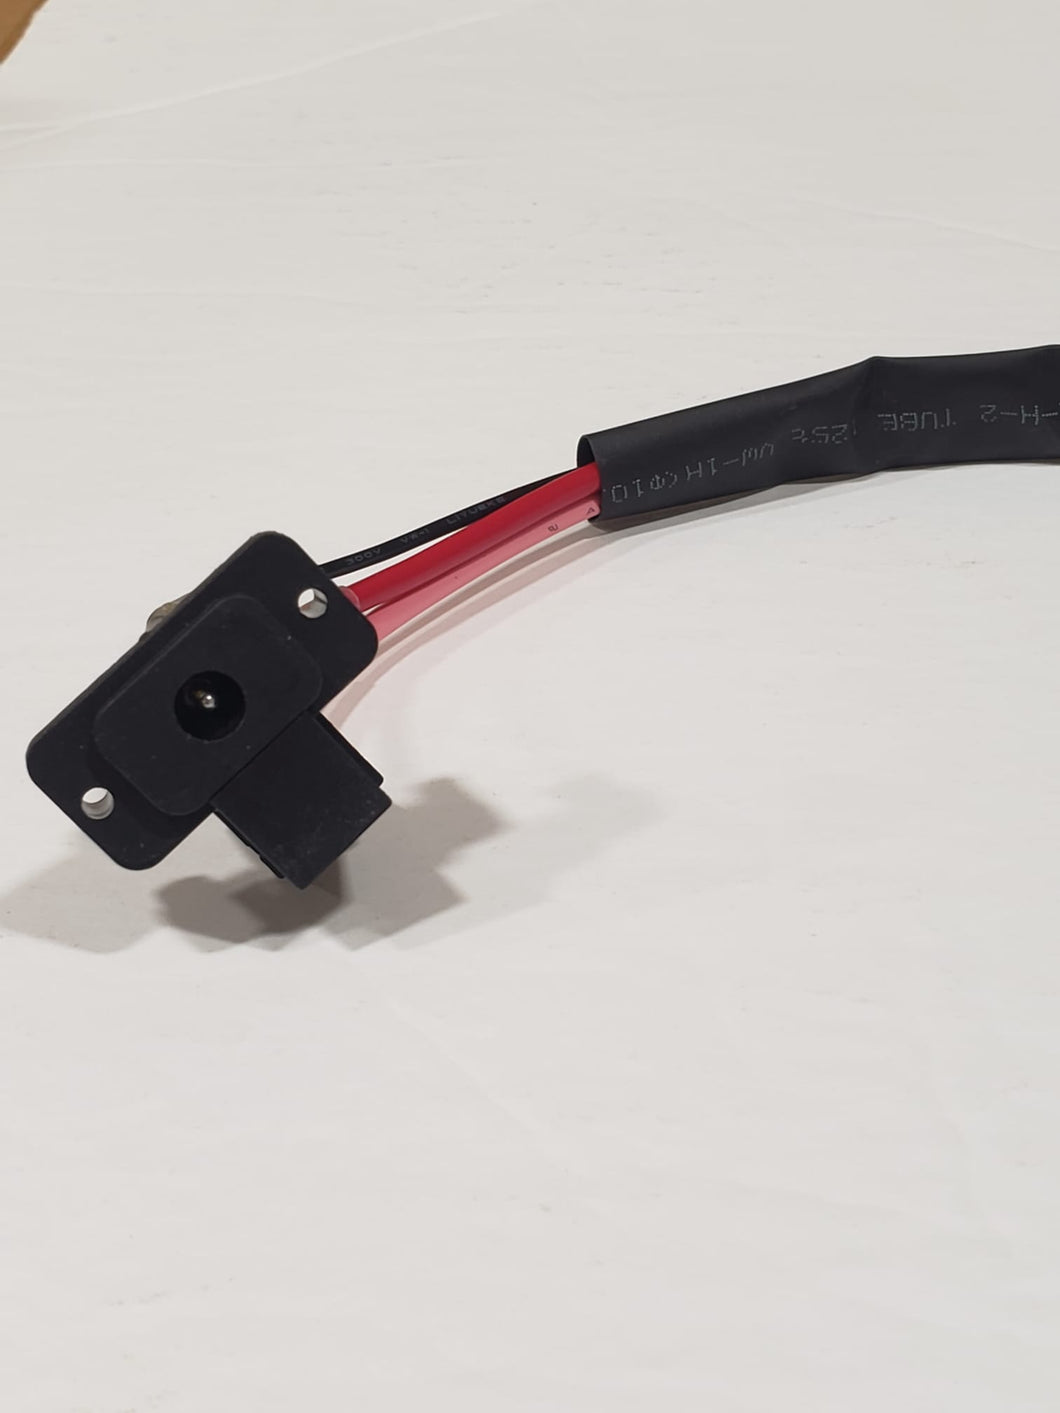 UTV Buggy 2000N charging port and cable